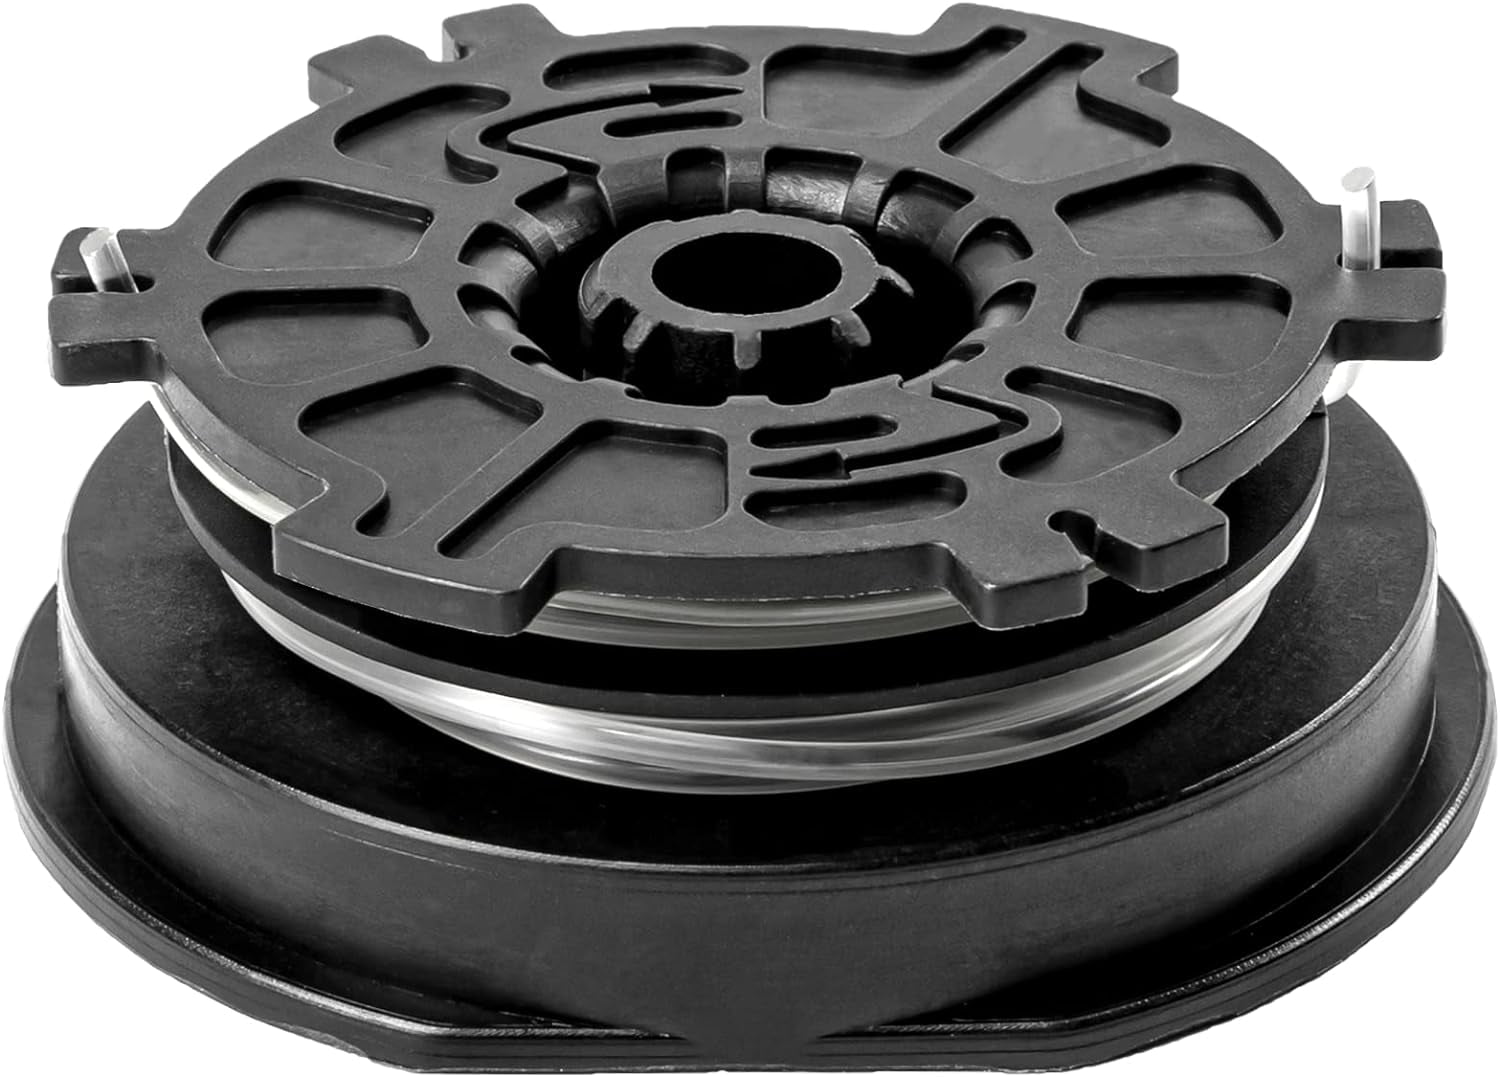 Trimmer Line Replacement Spool, Easy Feed, Dual-Line, .08-Inch